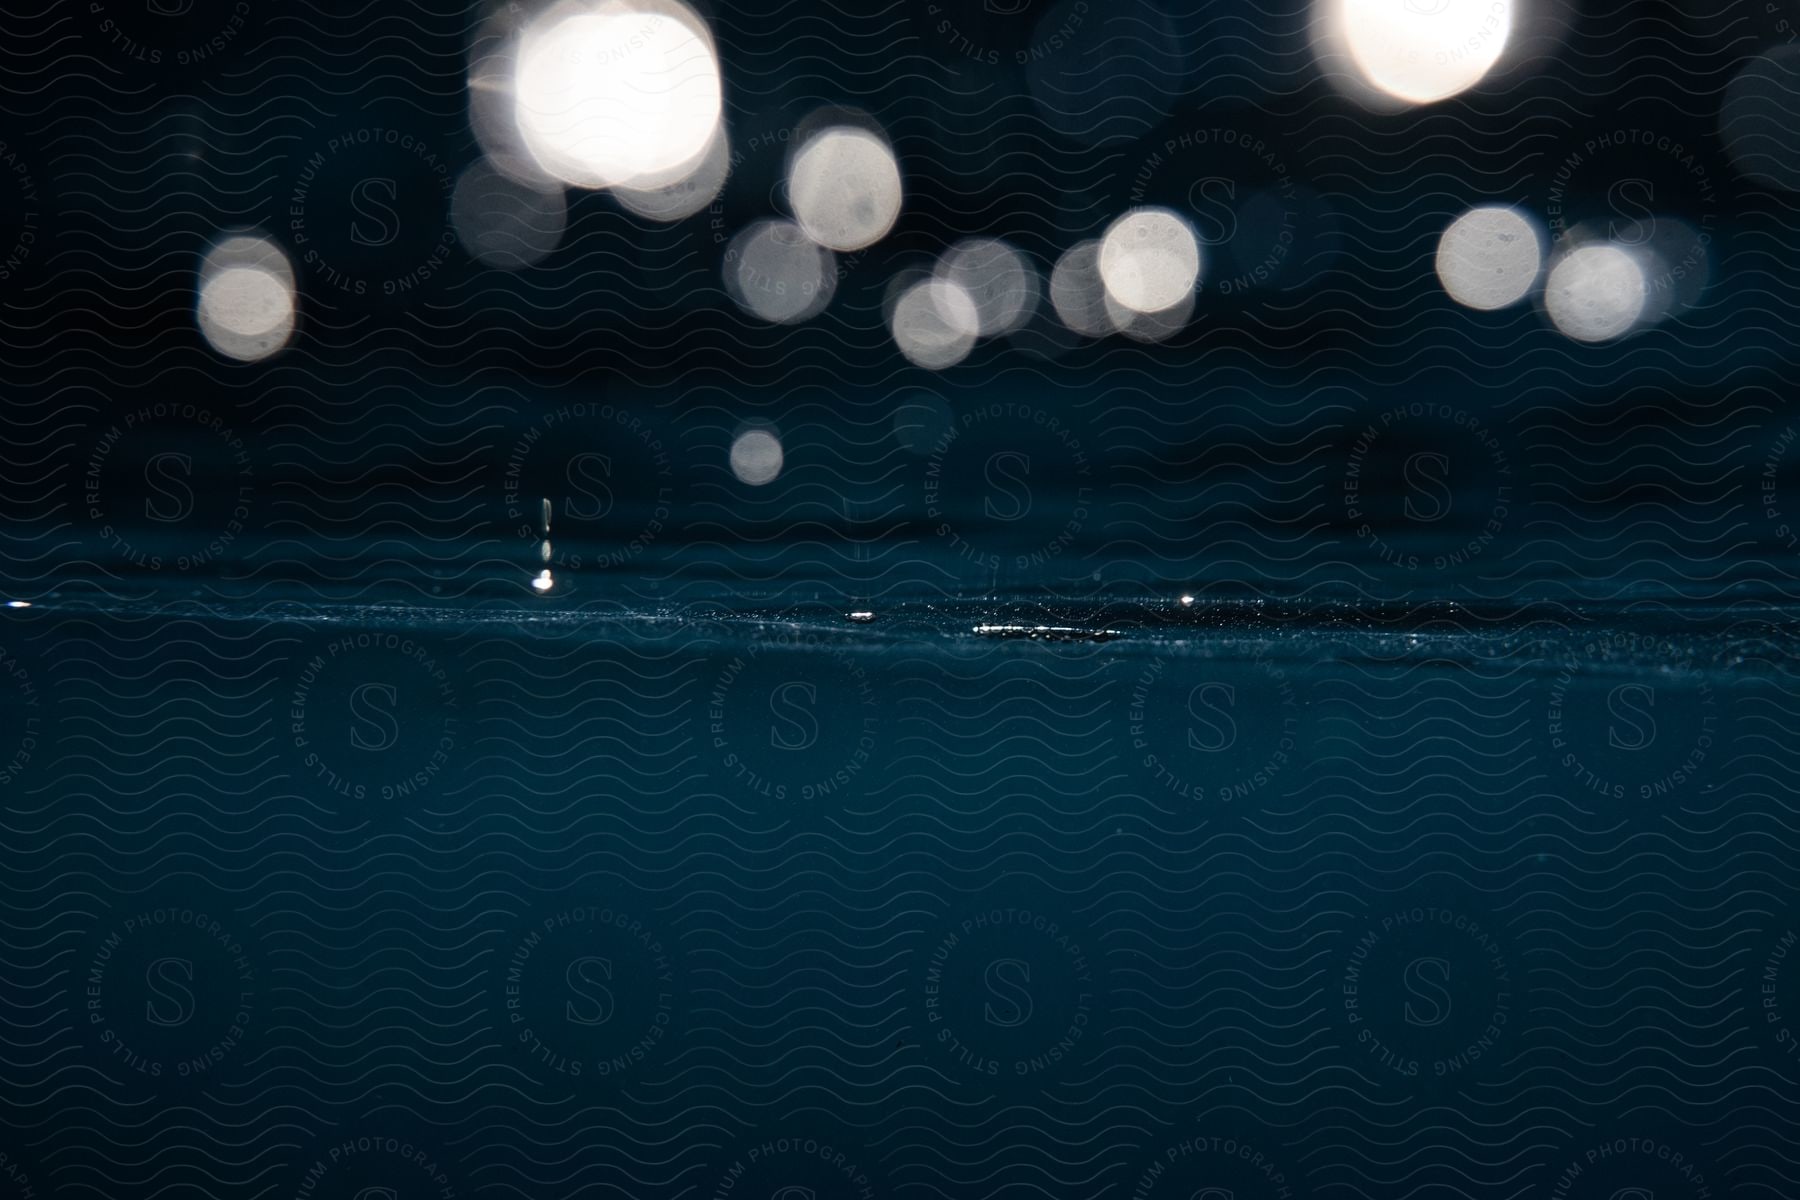 The underside of water surface at night showing abstract shapes and textures